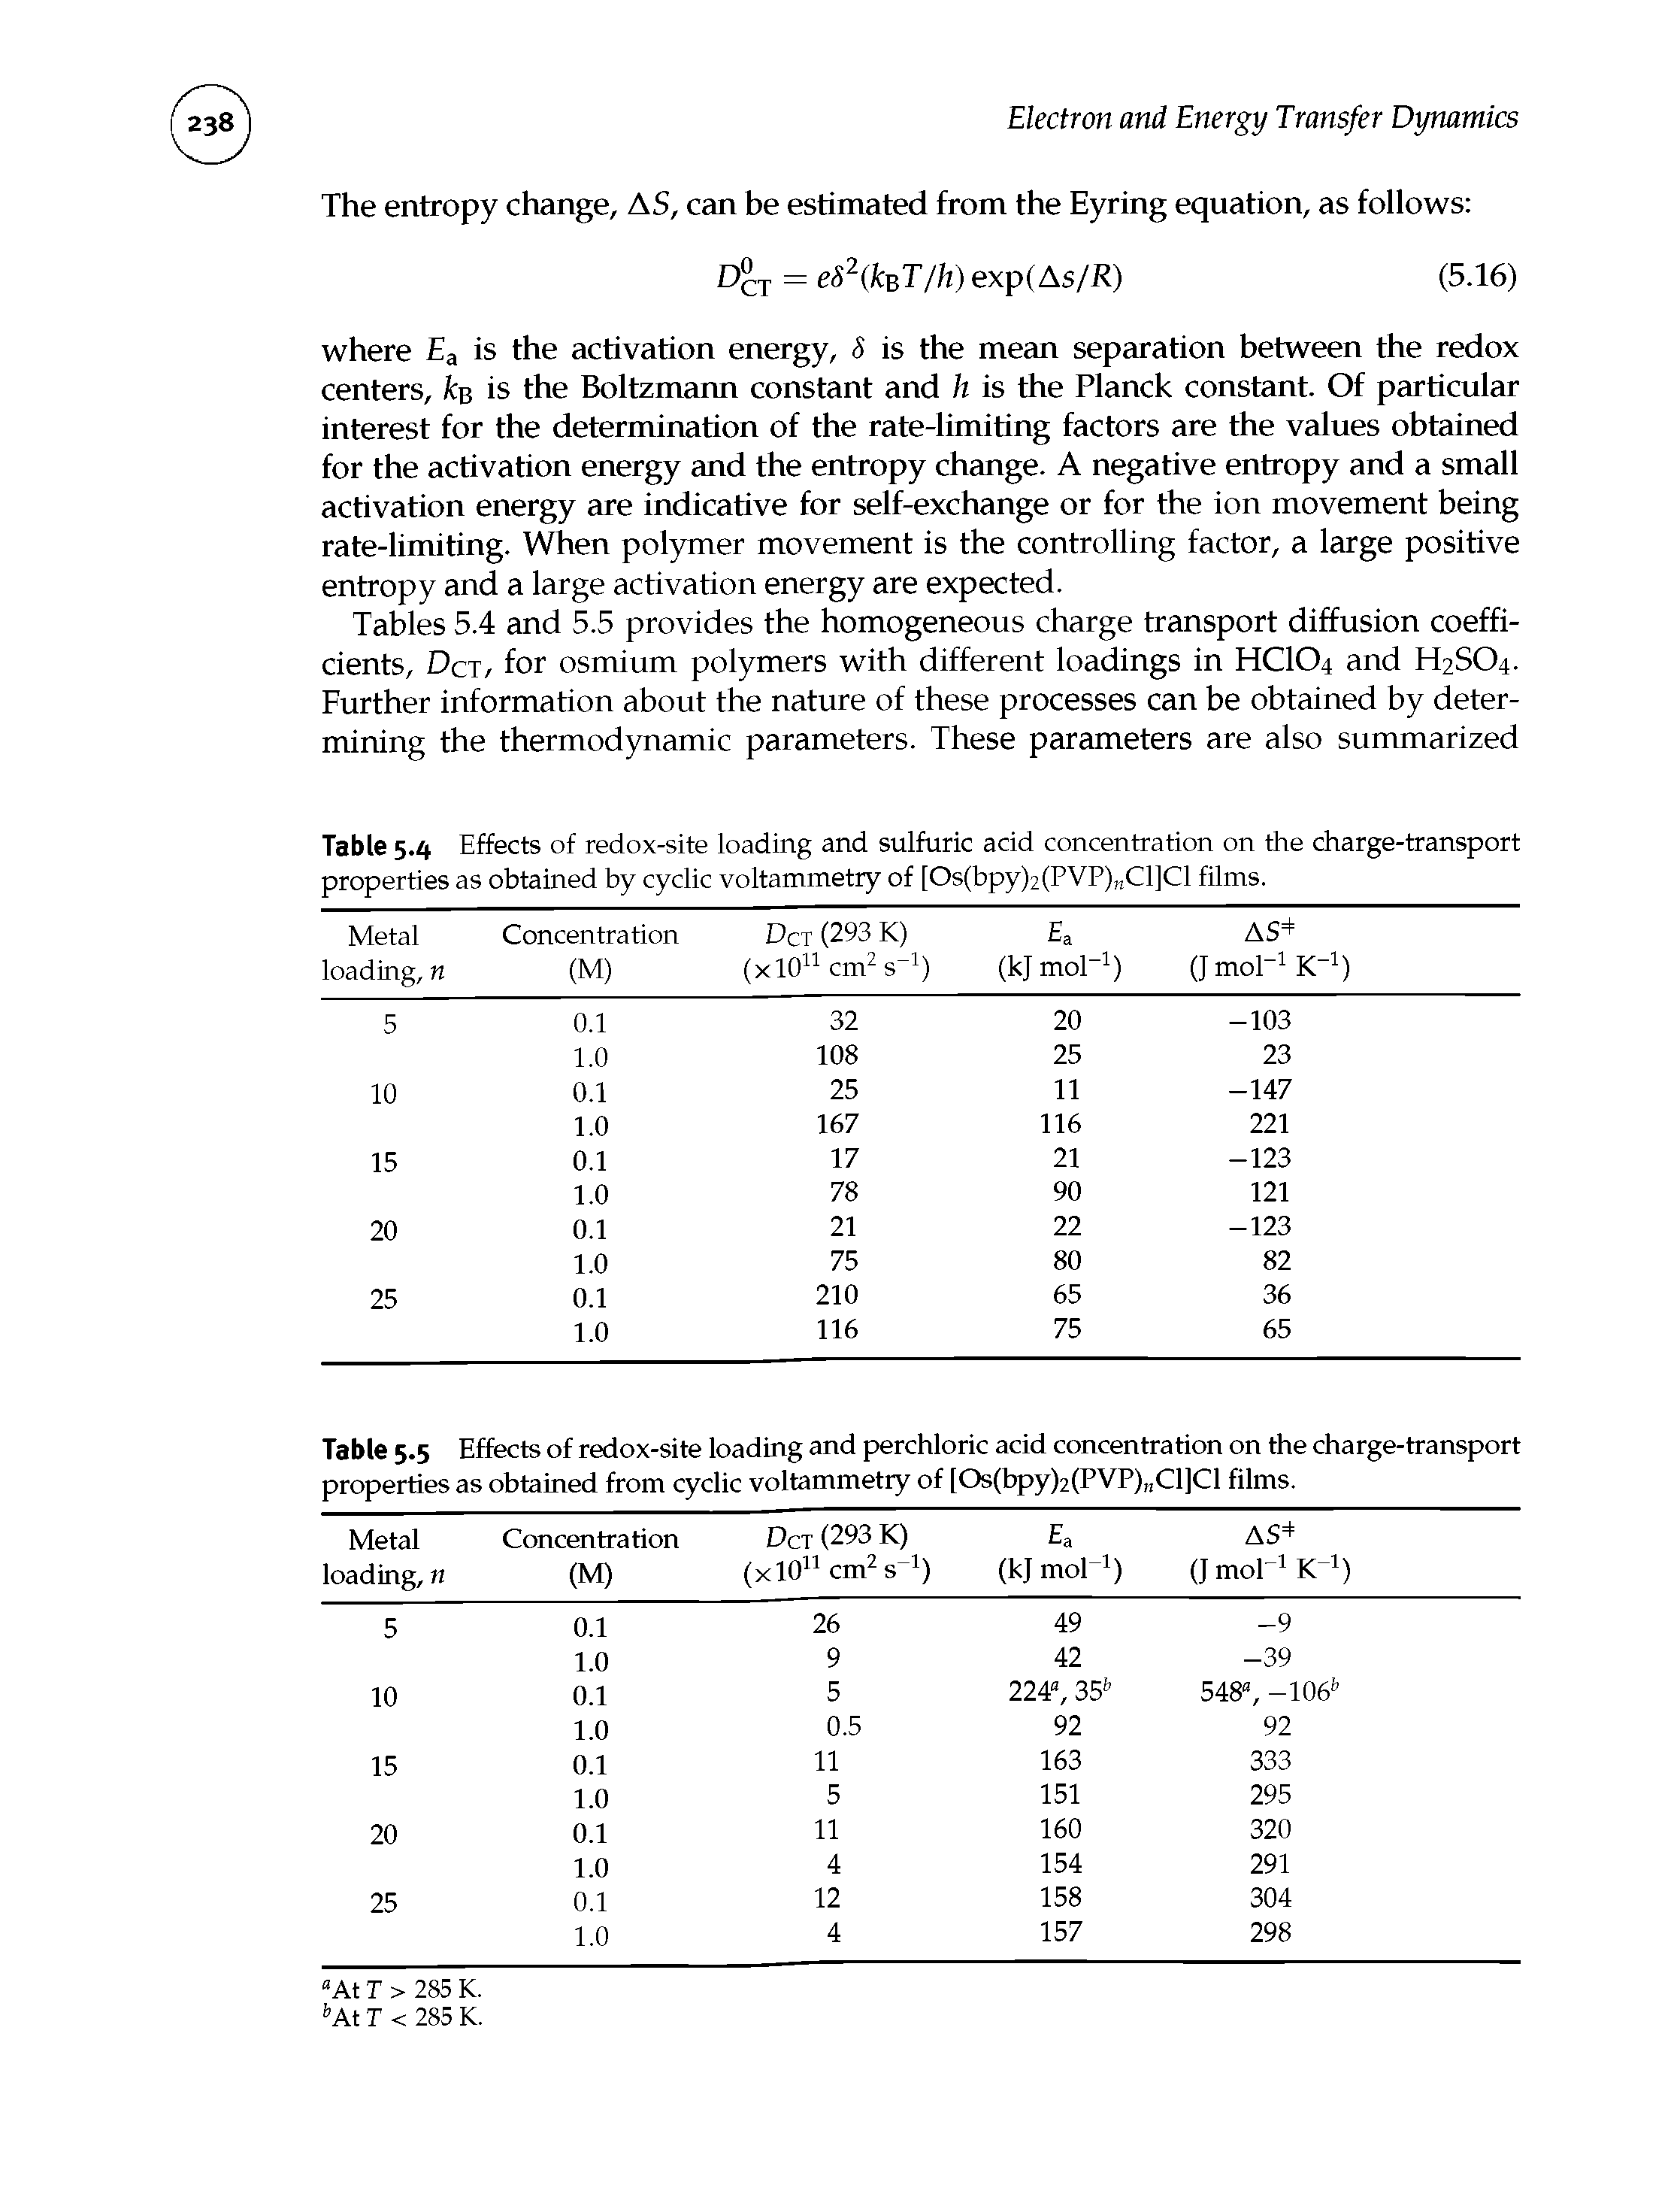 Tables 5.4 and 5.5 provides the homogeneous charge transport diffusion coefficients, Dct, for osmium polymers with different loadings in HCIO4 and H2SO4. Further information about the nature of these processes can be obtained by determining the thermodynamic parameters. These parameters are also summarized...